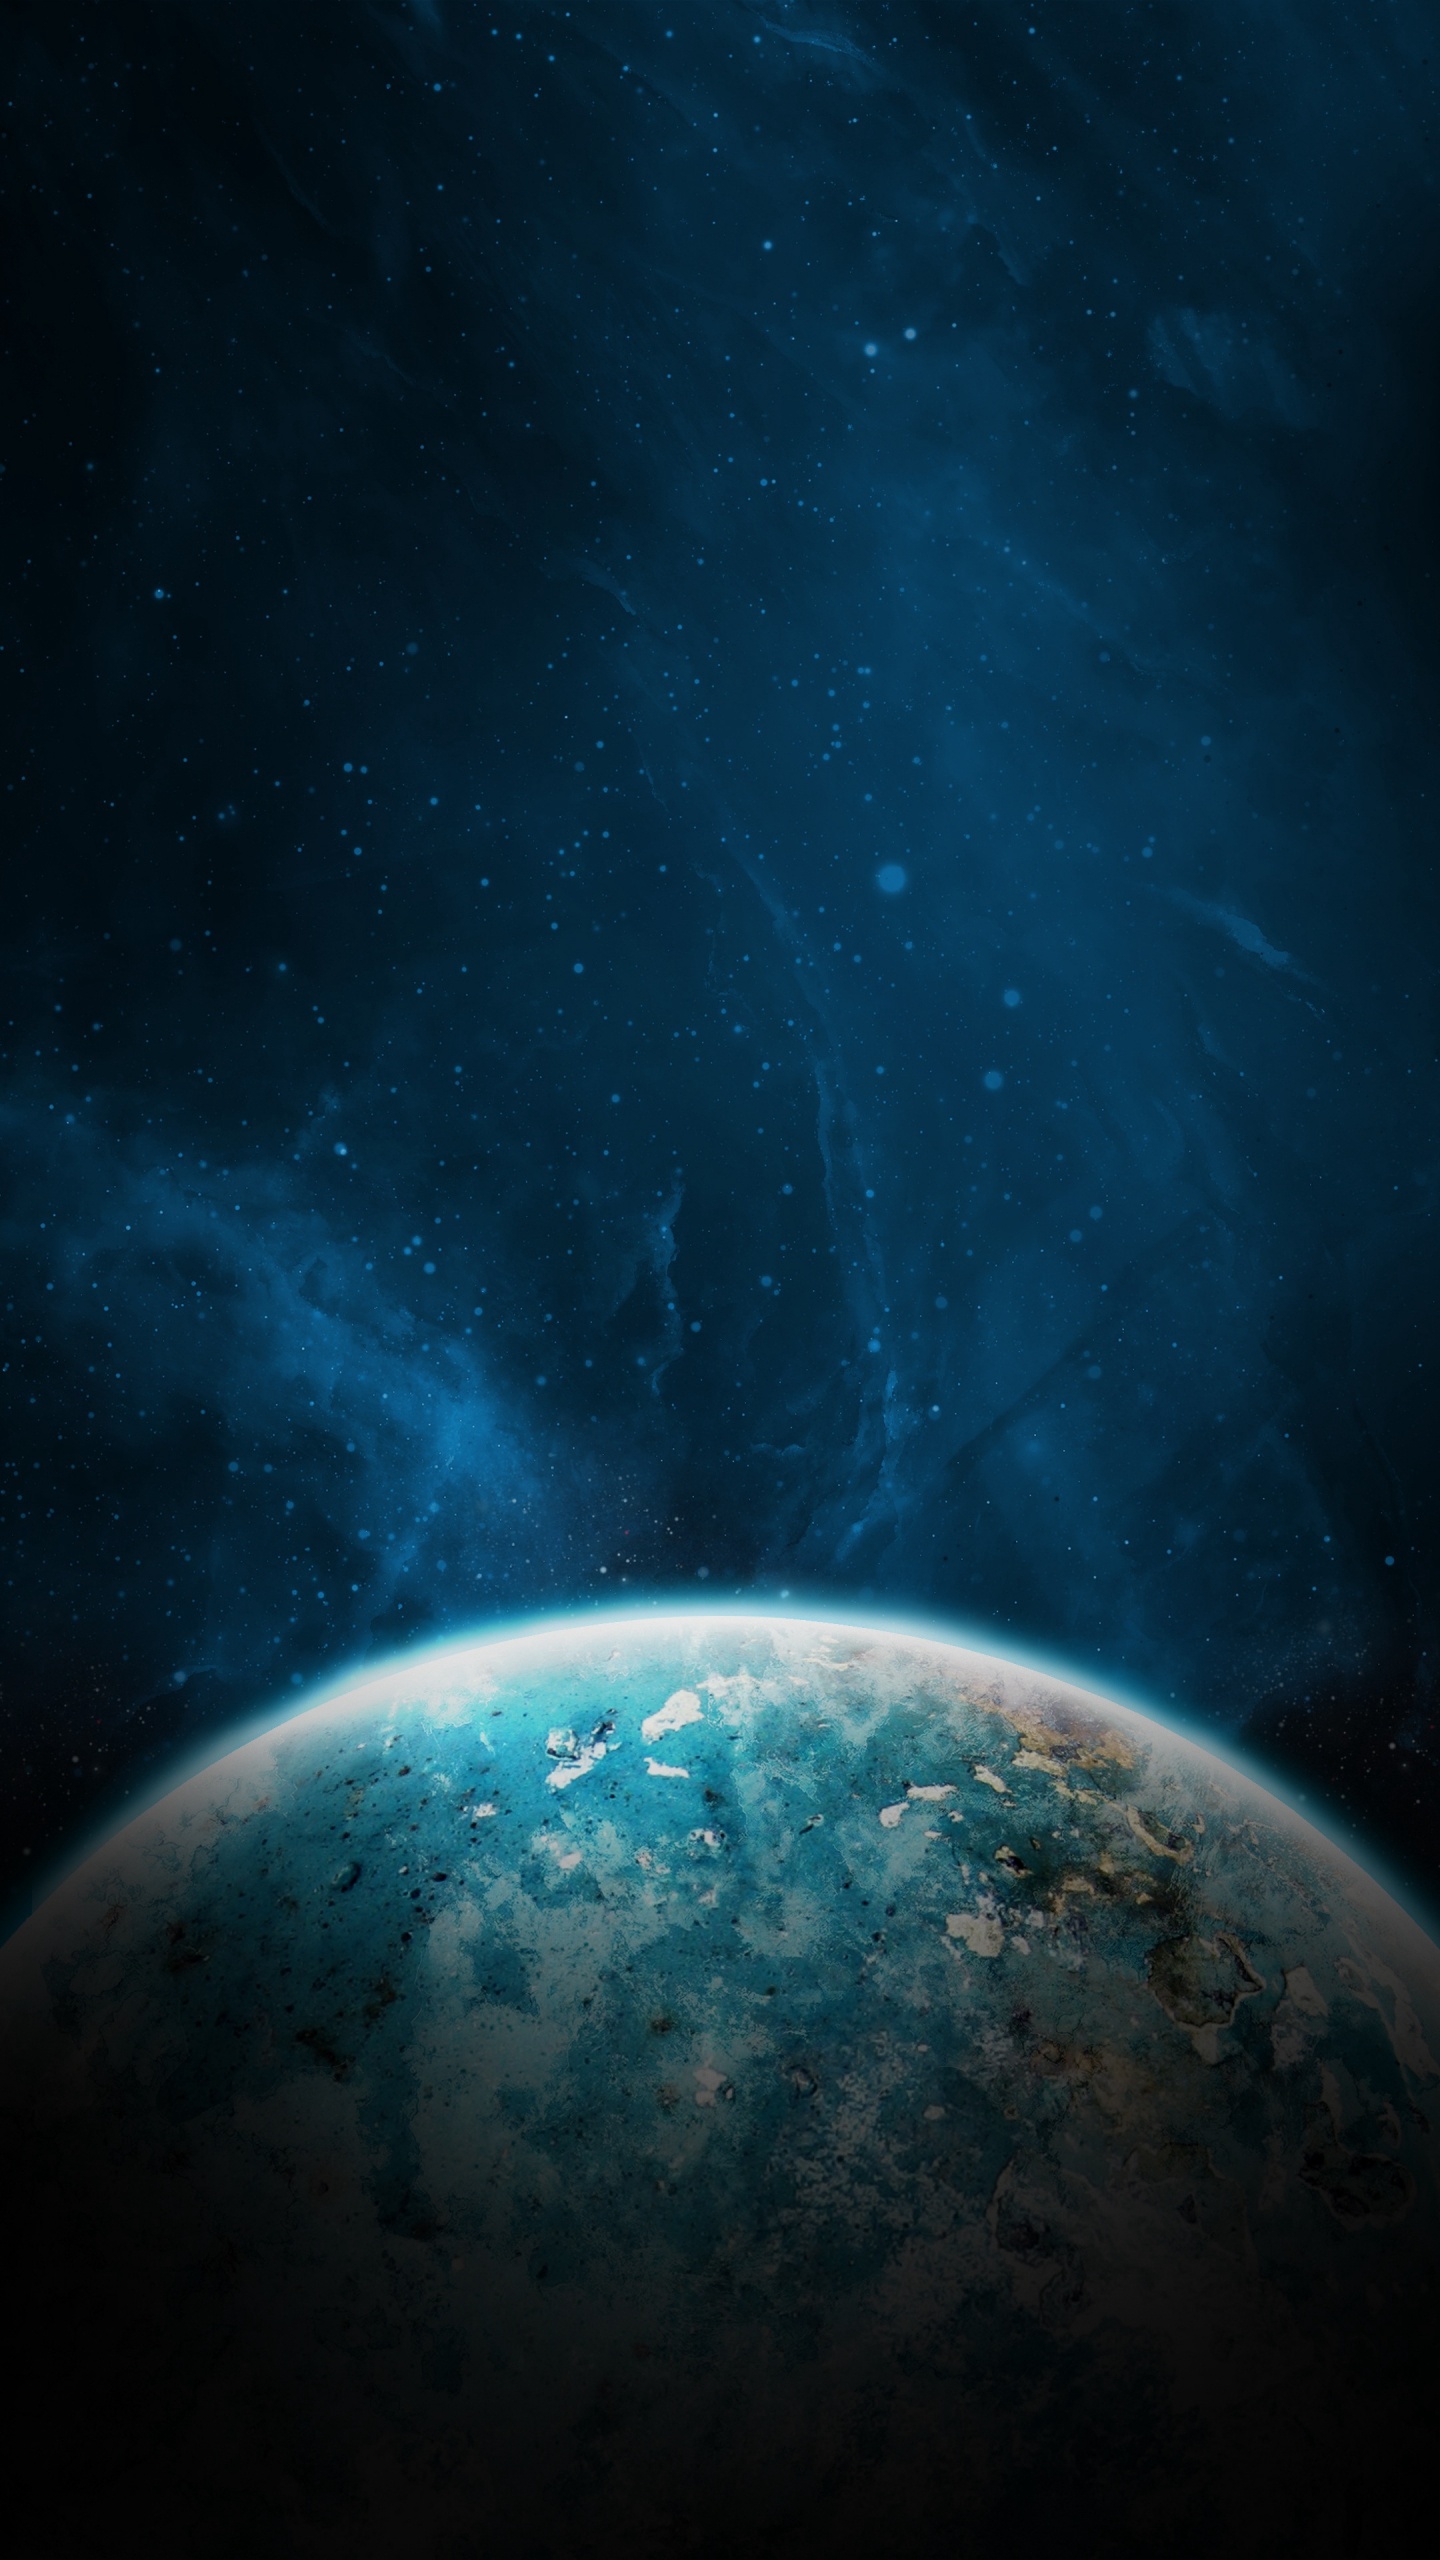 Blue and Black Planet With Stars. Wallpaper in 1440x2560 Resolution